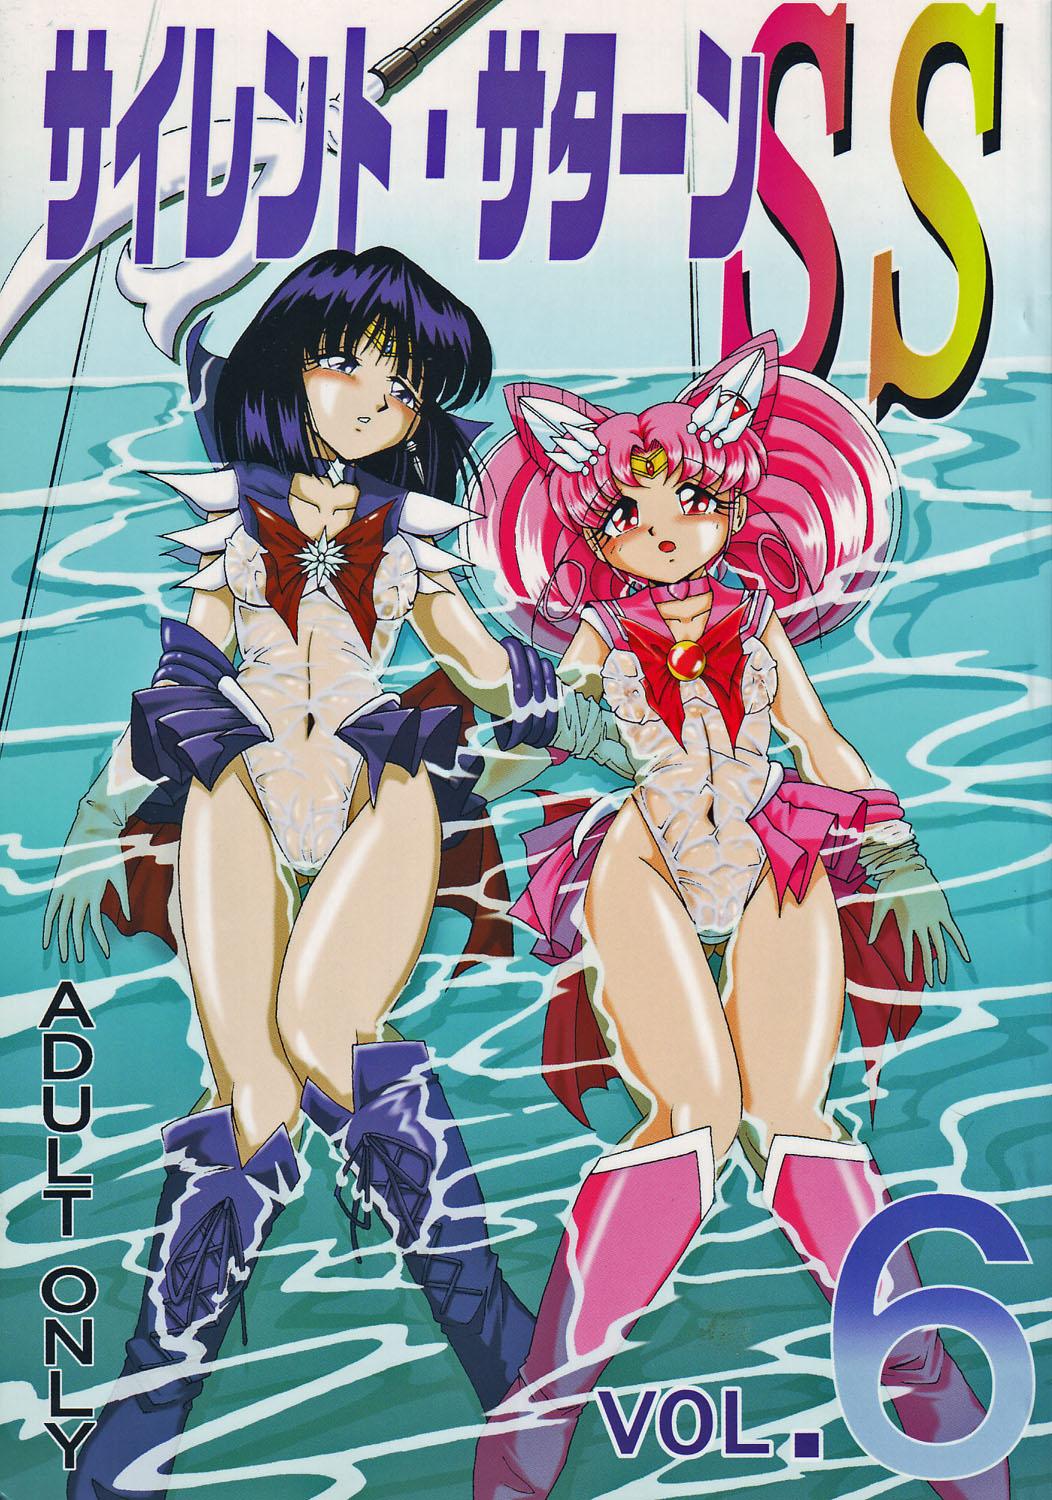 Vadia Silent Saturn SS vol. 6 - Sailor moon Nudity - Picture 1